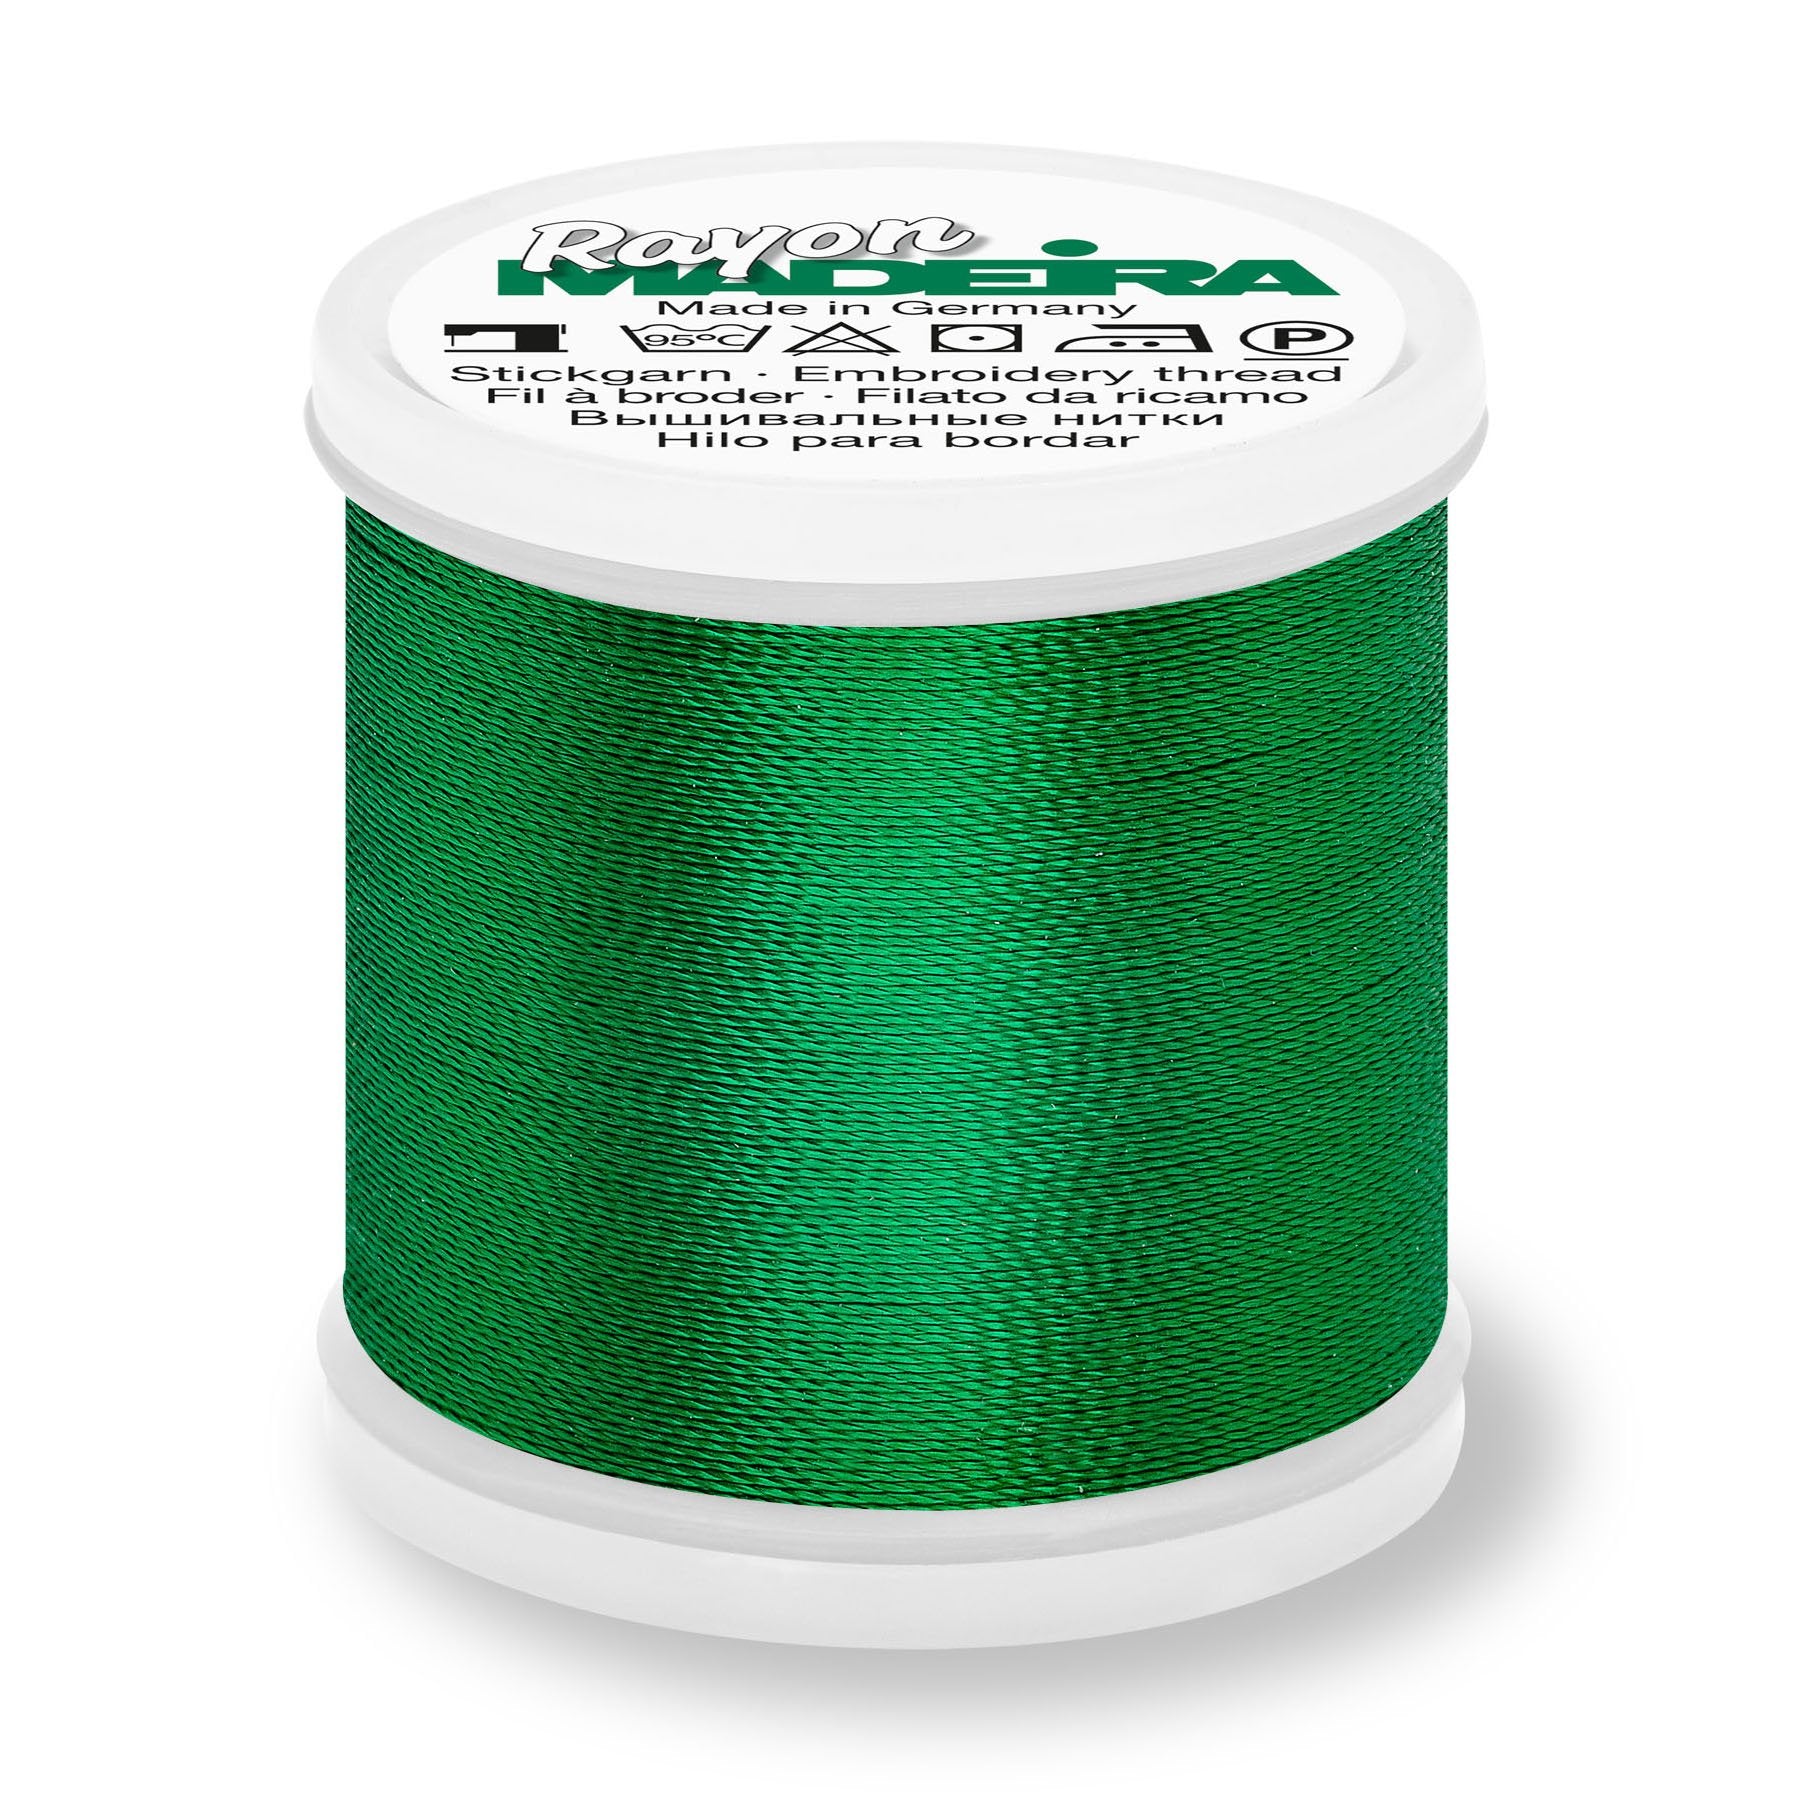 Madeira Rayon 40 Embroidery Thread 200m #1370 Dark Green from Jaycotts Sewing Supplies